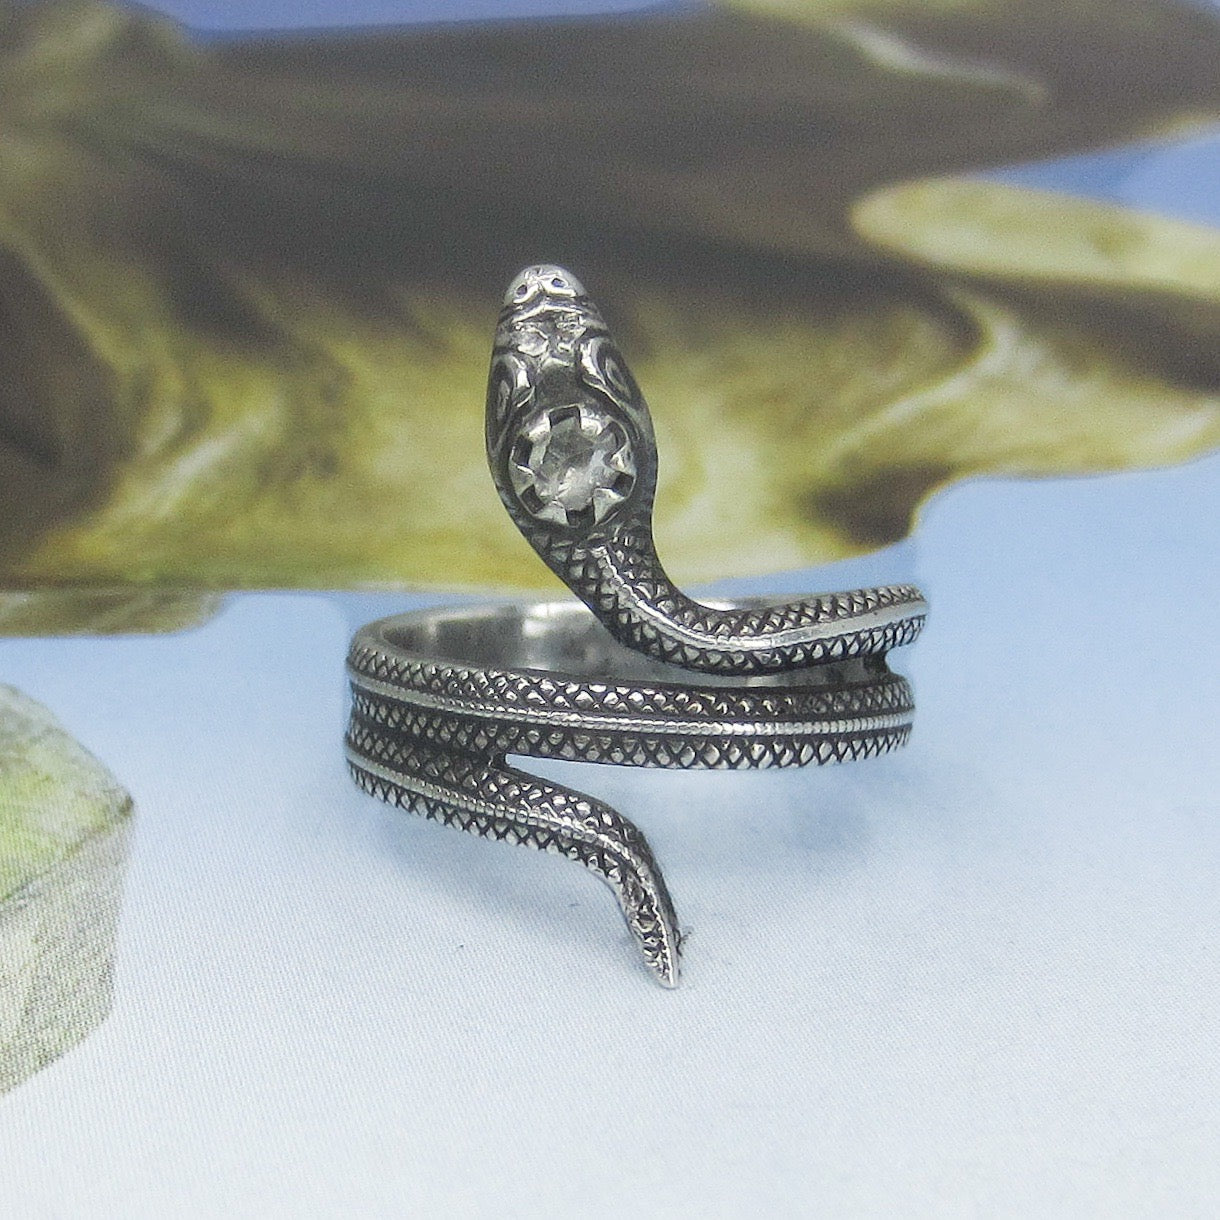 SOLD-Vintage Rose Cut Diamond Snake Ring Sterling, size 6.75 Russian c. 1970